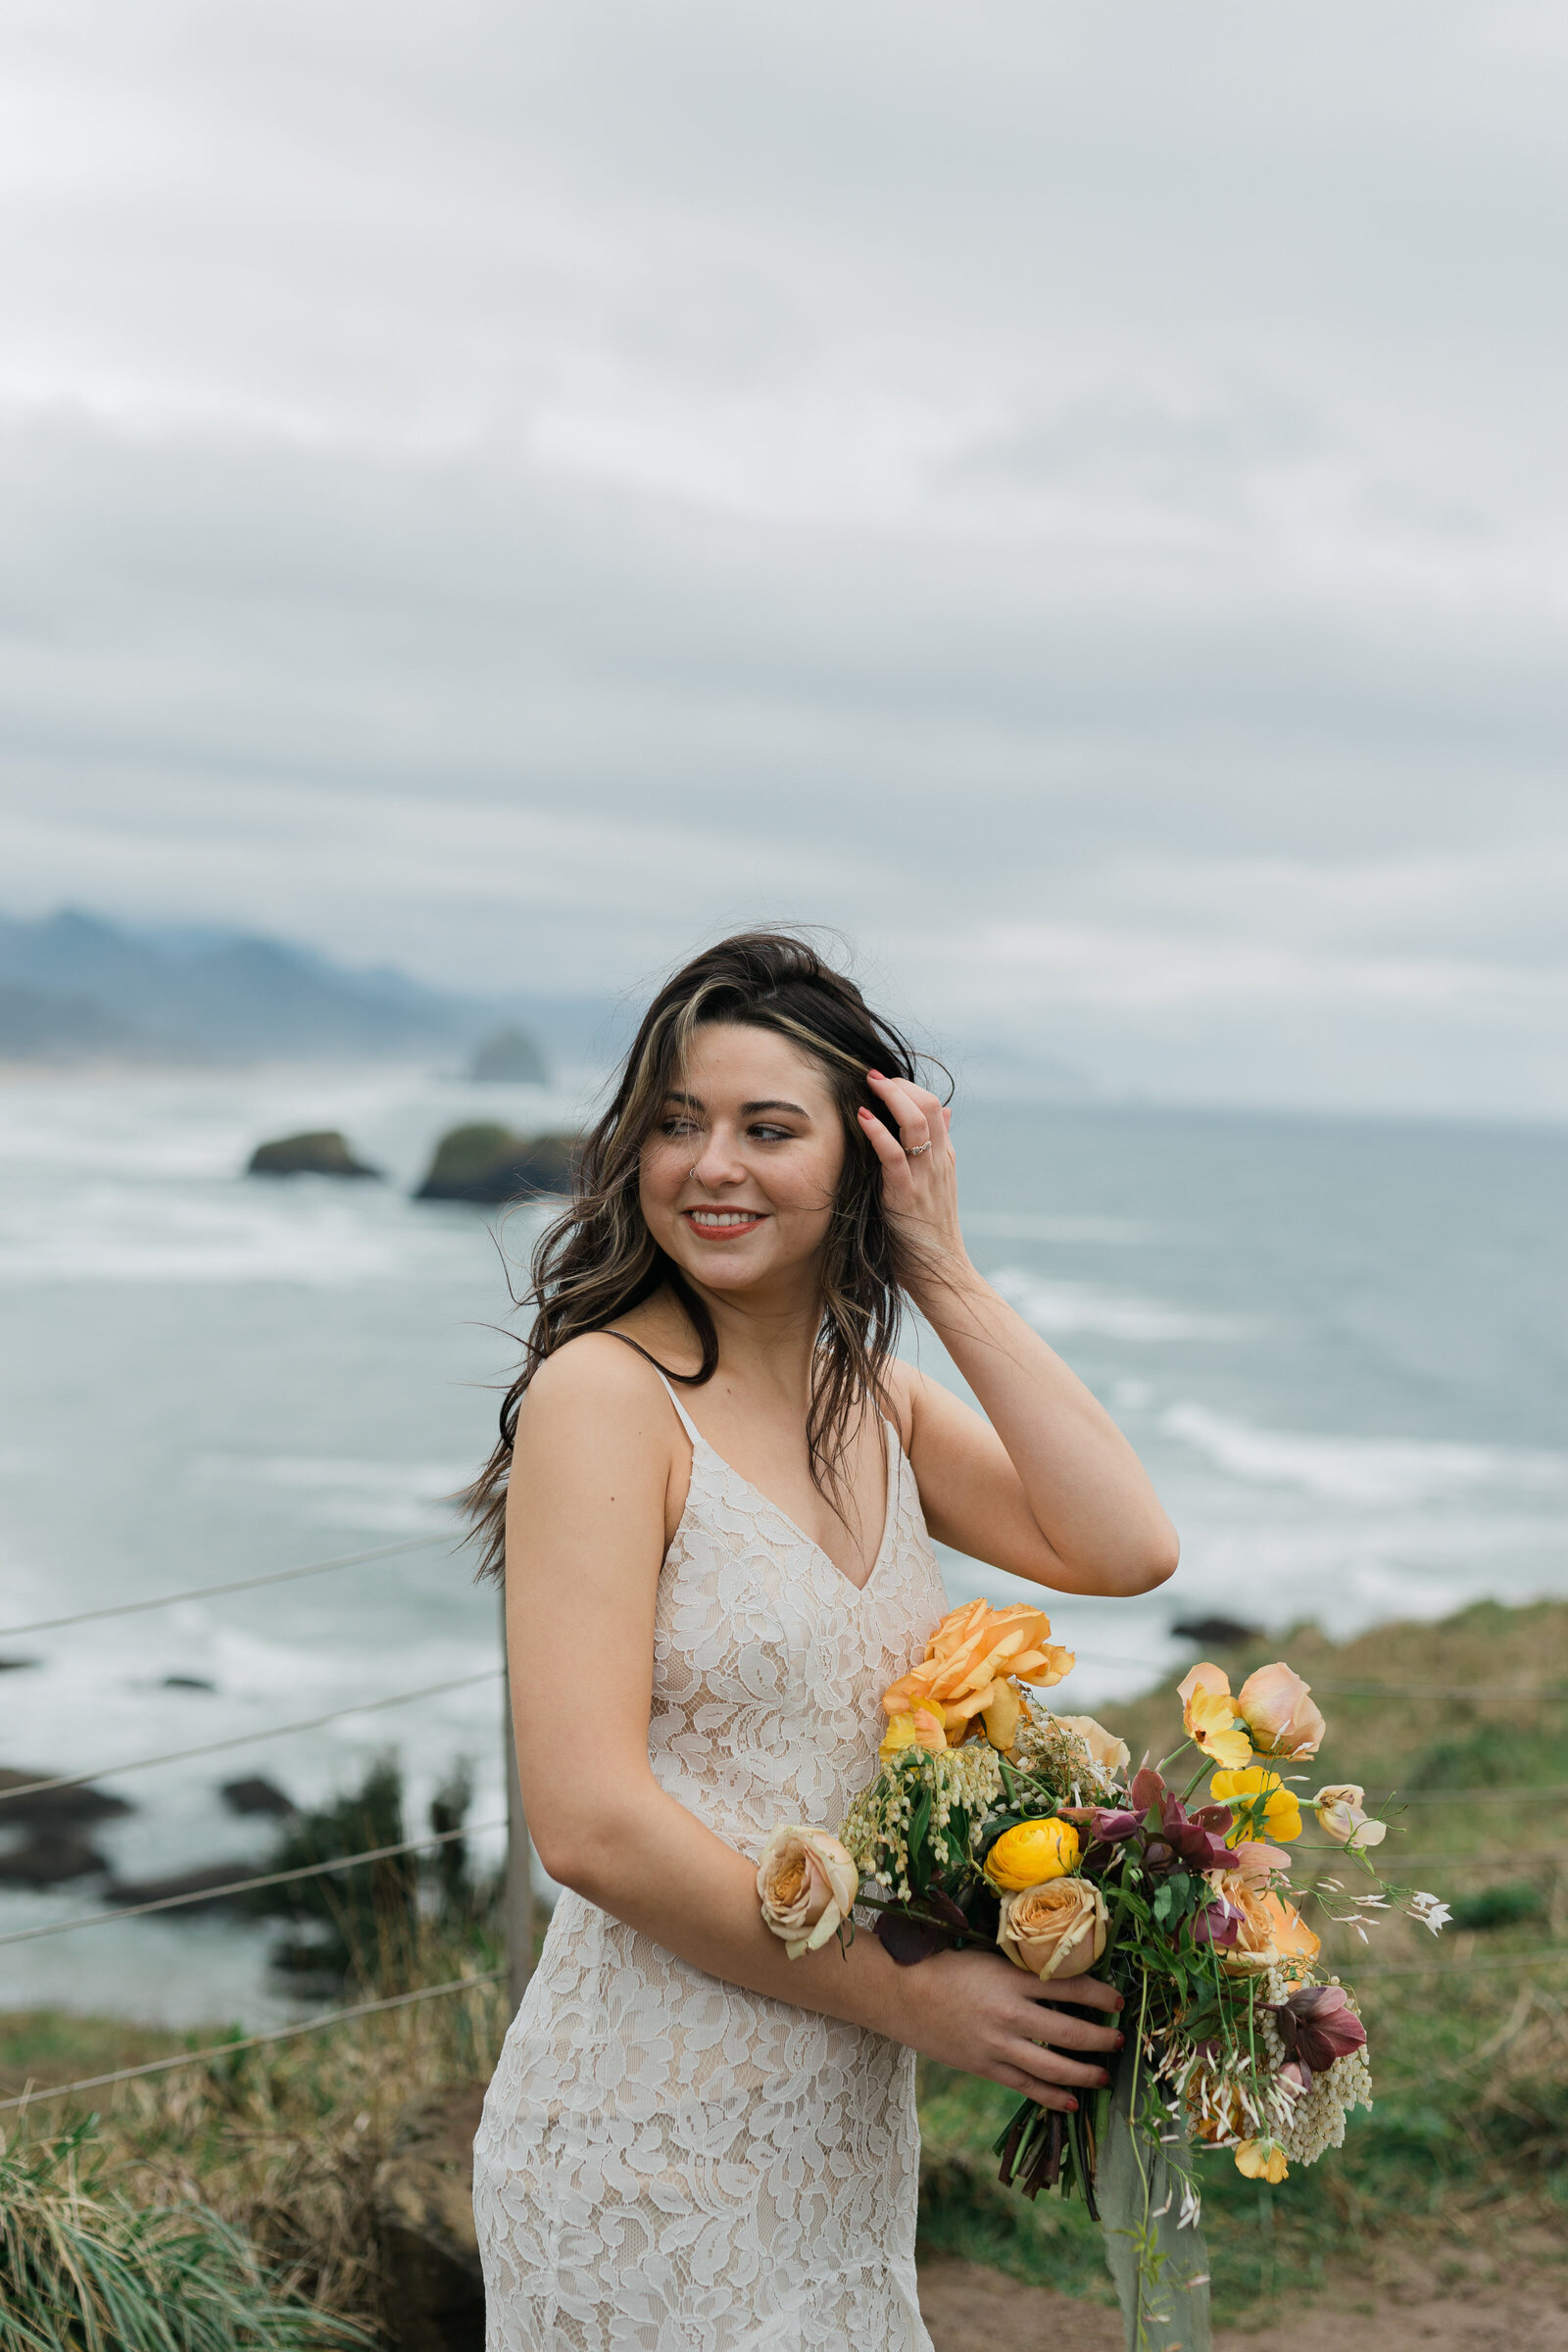 Bride's portrait behind a cloudy scenery with ocean